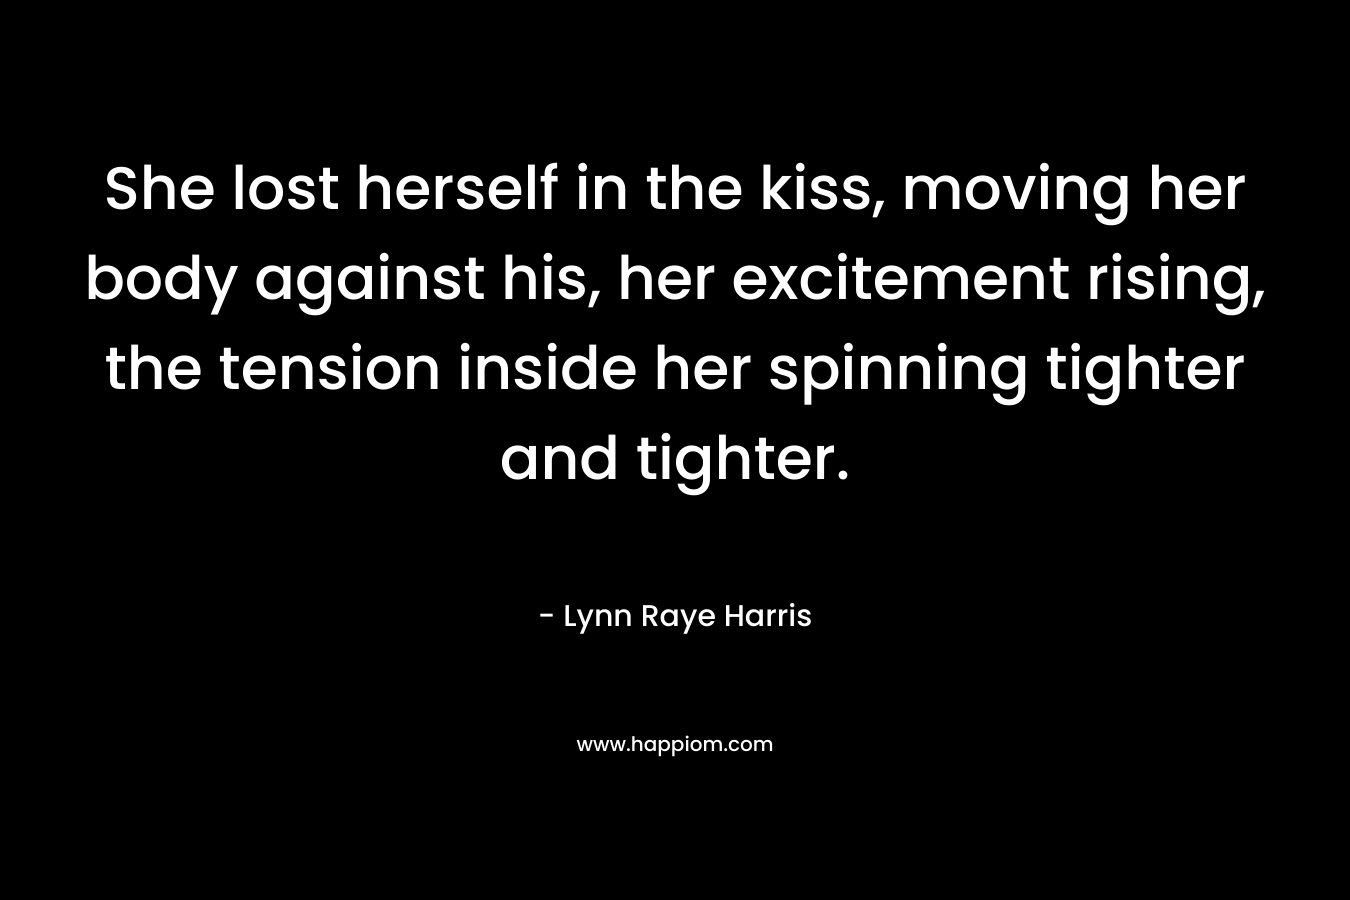 She lost herself in the kiss, moving her body against his, her excitement rising, the tension inside her spinning tighter and tighter. – Lynn Raye Harris